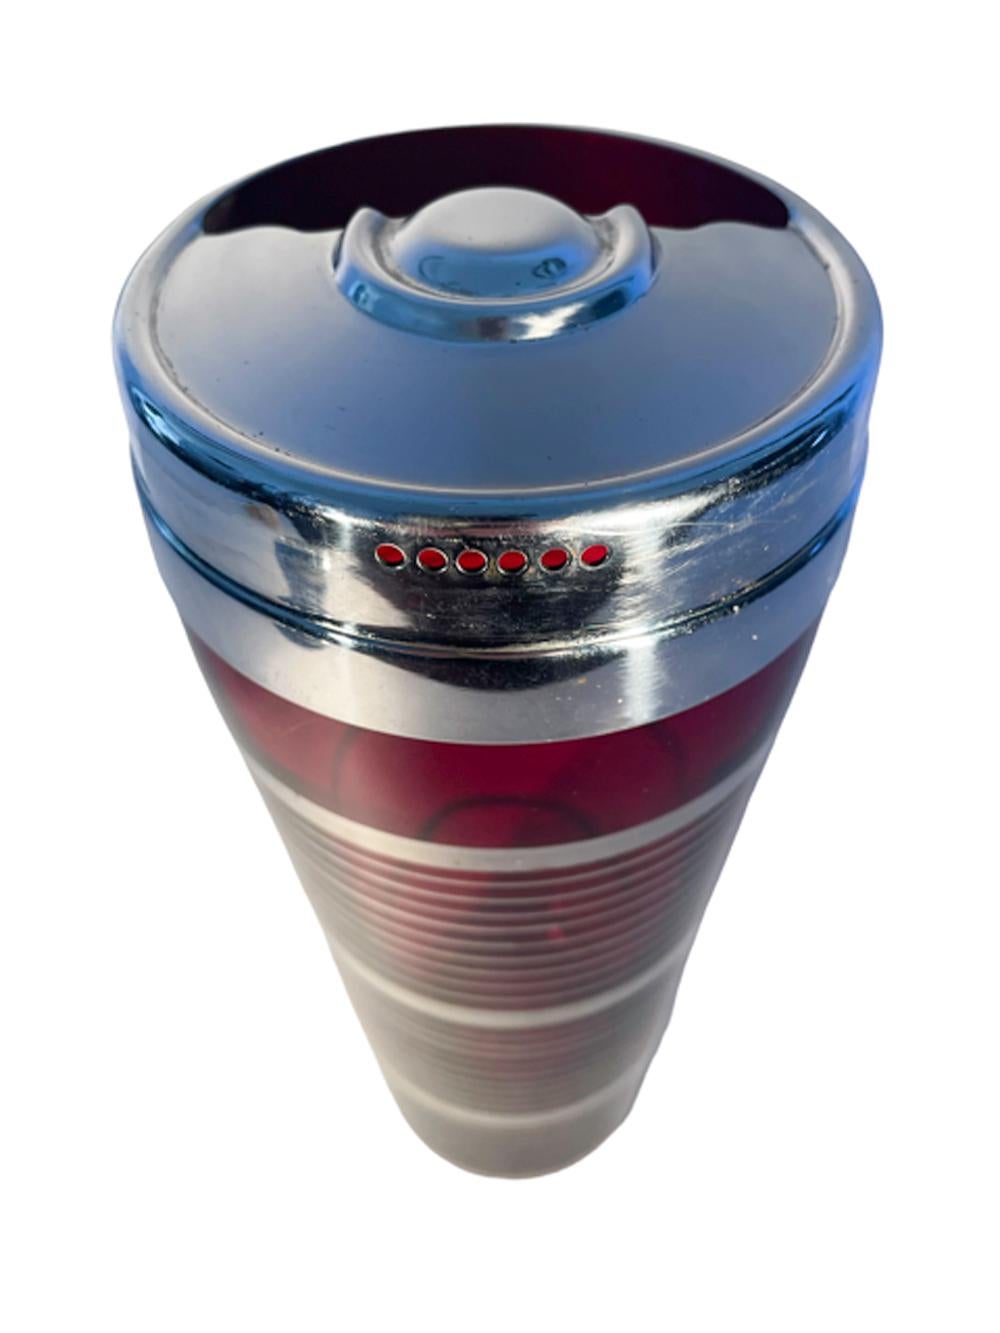 Art Deco cocktail shaker in ruby red glass with a polished foot and platinum bands and chrome lid. The two-part lid allows the shaker to also be used as a mixing glass for cocktails that should be stirred. The inner lid has a large opening which